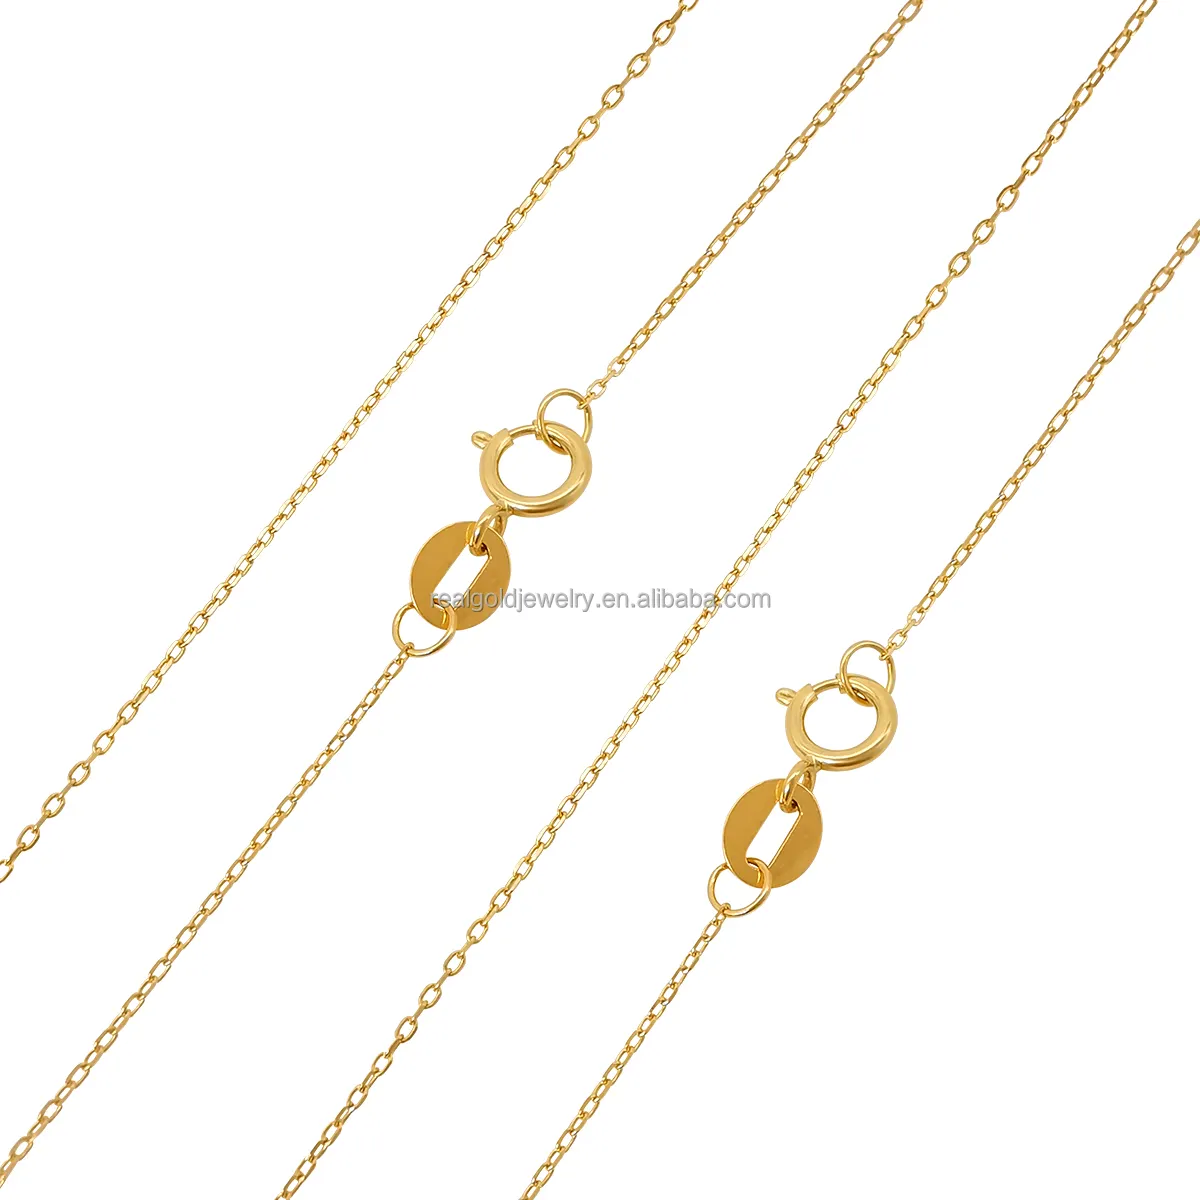 Fine Jewelry Necklace Chain 18K Solid Gold Cross Chain Women Jewelry 18k Yellow Gold Chinese Gold Necklace